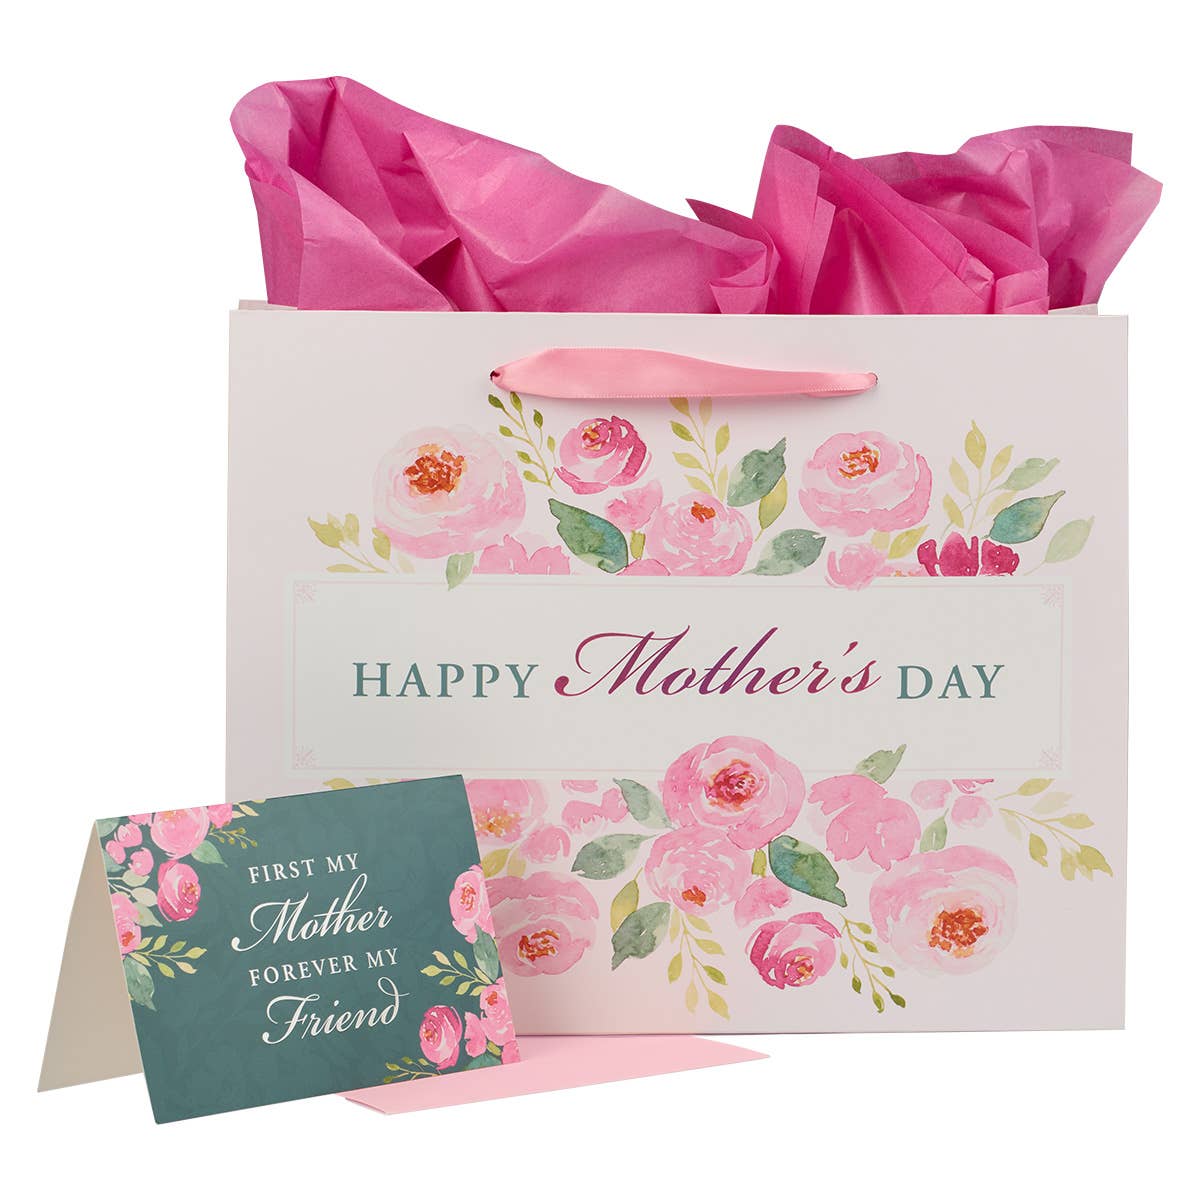 Happy Mother's Day Pink Peony Large Landscape Gift Bag with